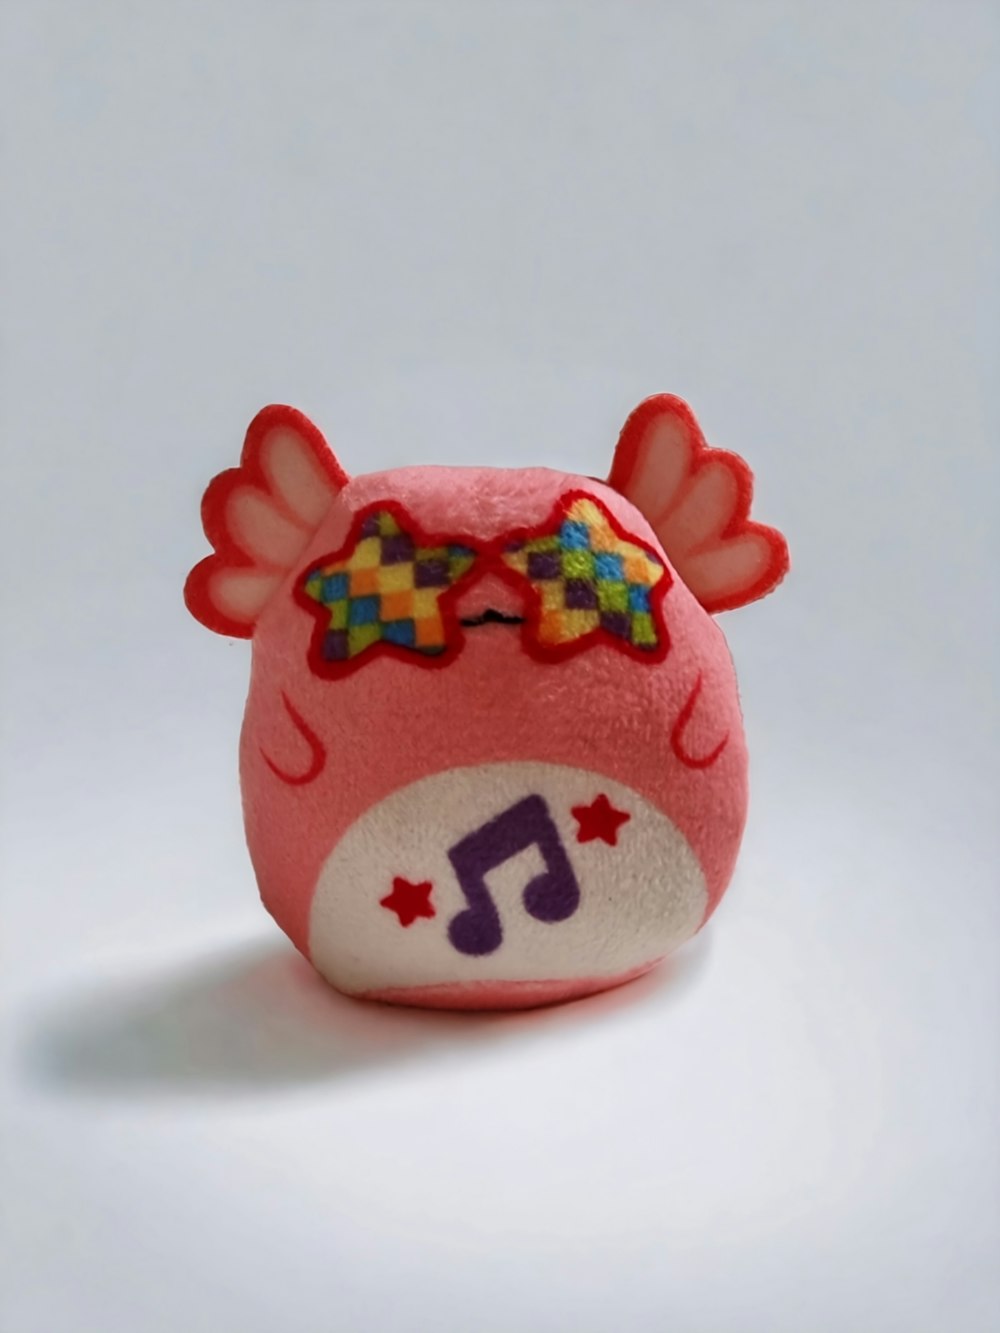 a red stuffed animal with a musical note on it